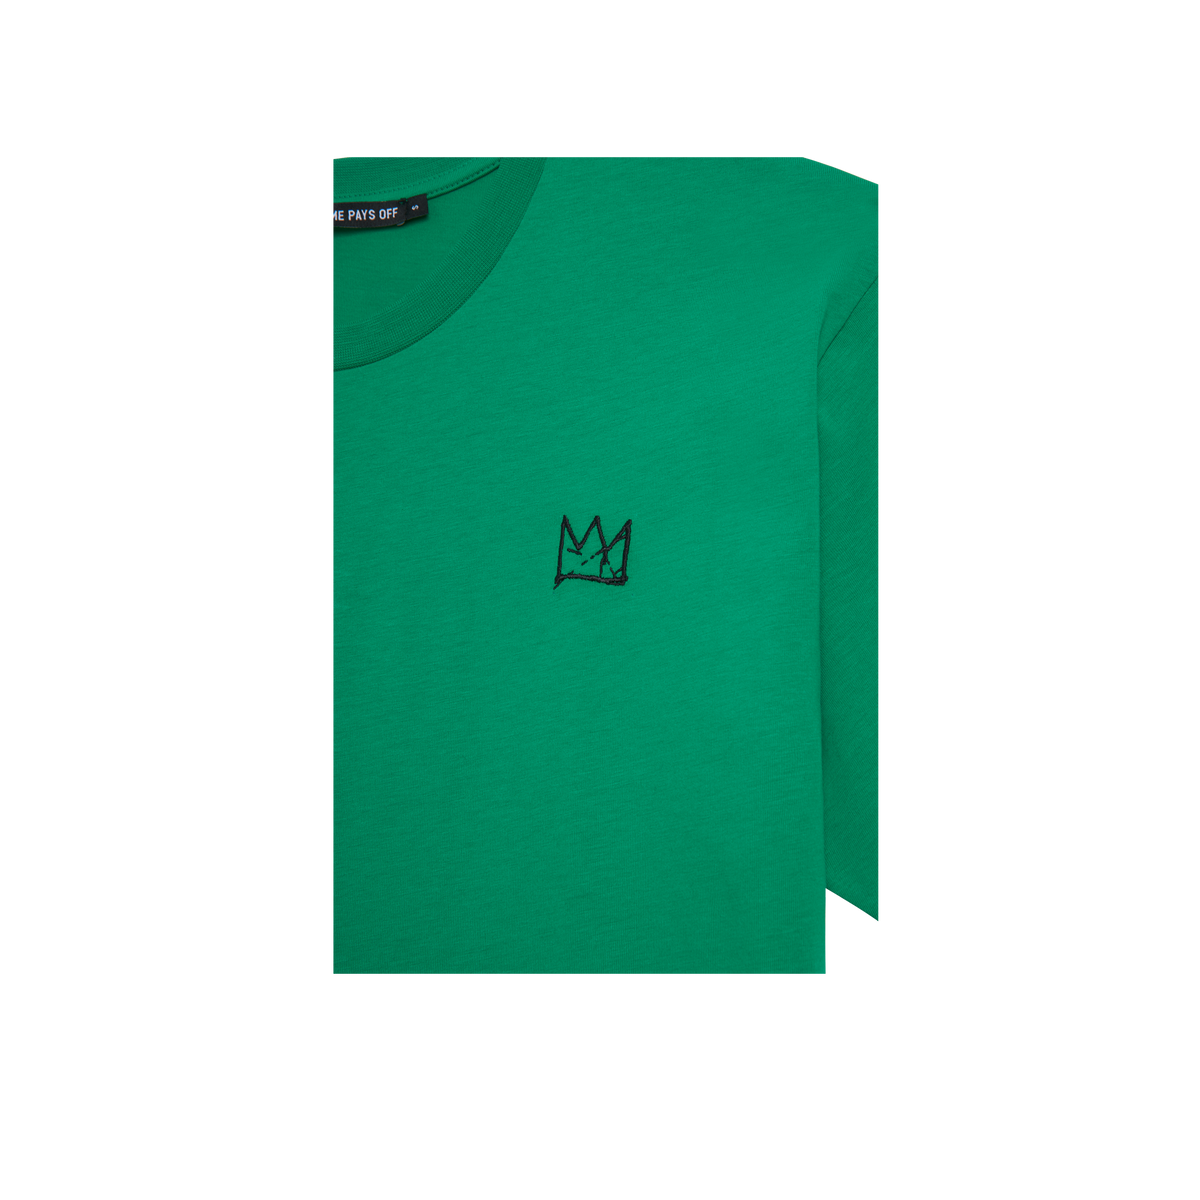 Basquiat "Crown" Embroidered T-Shirt